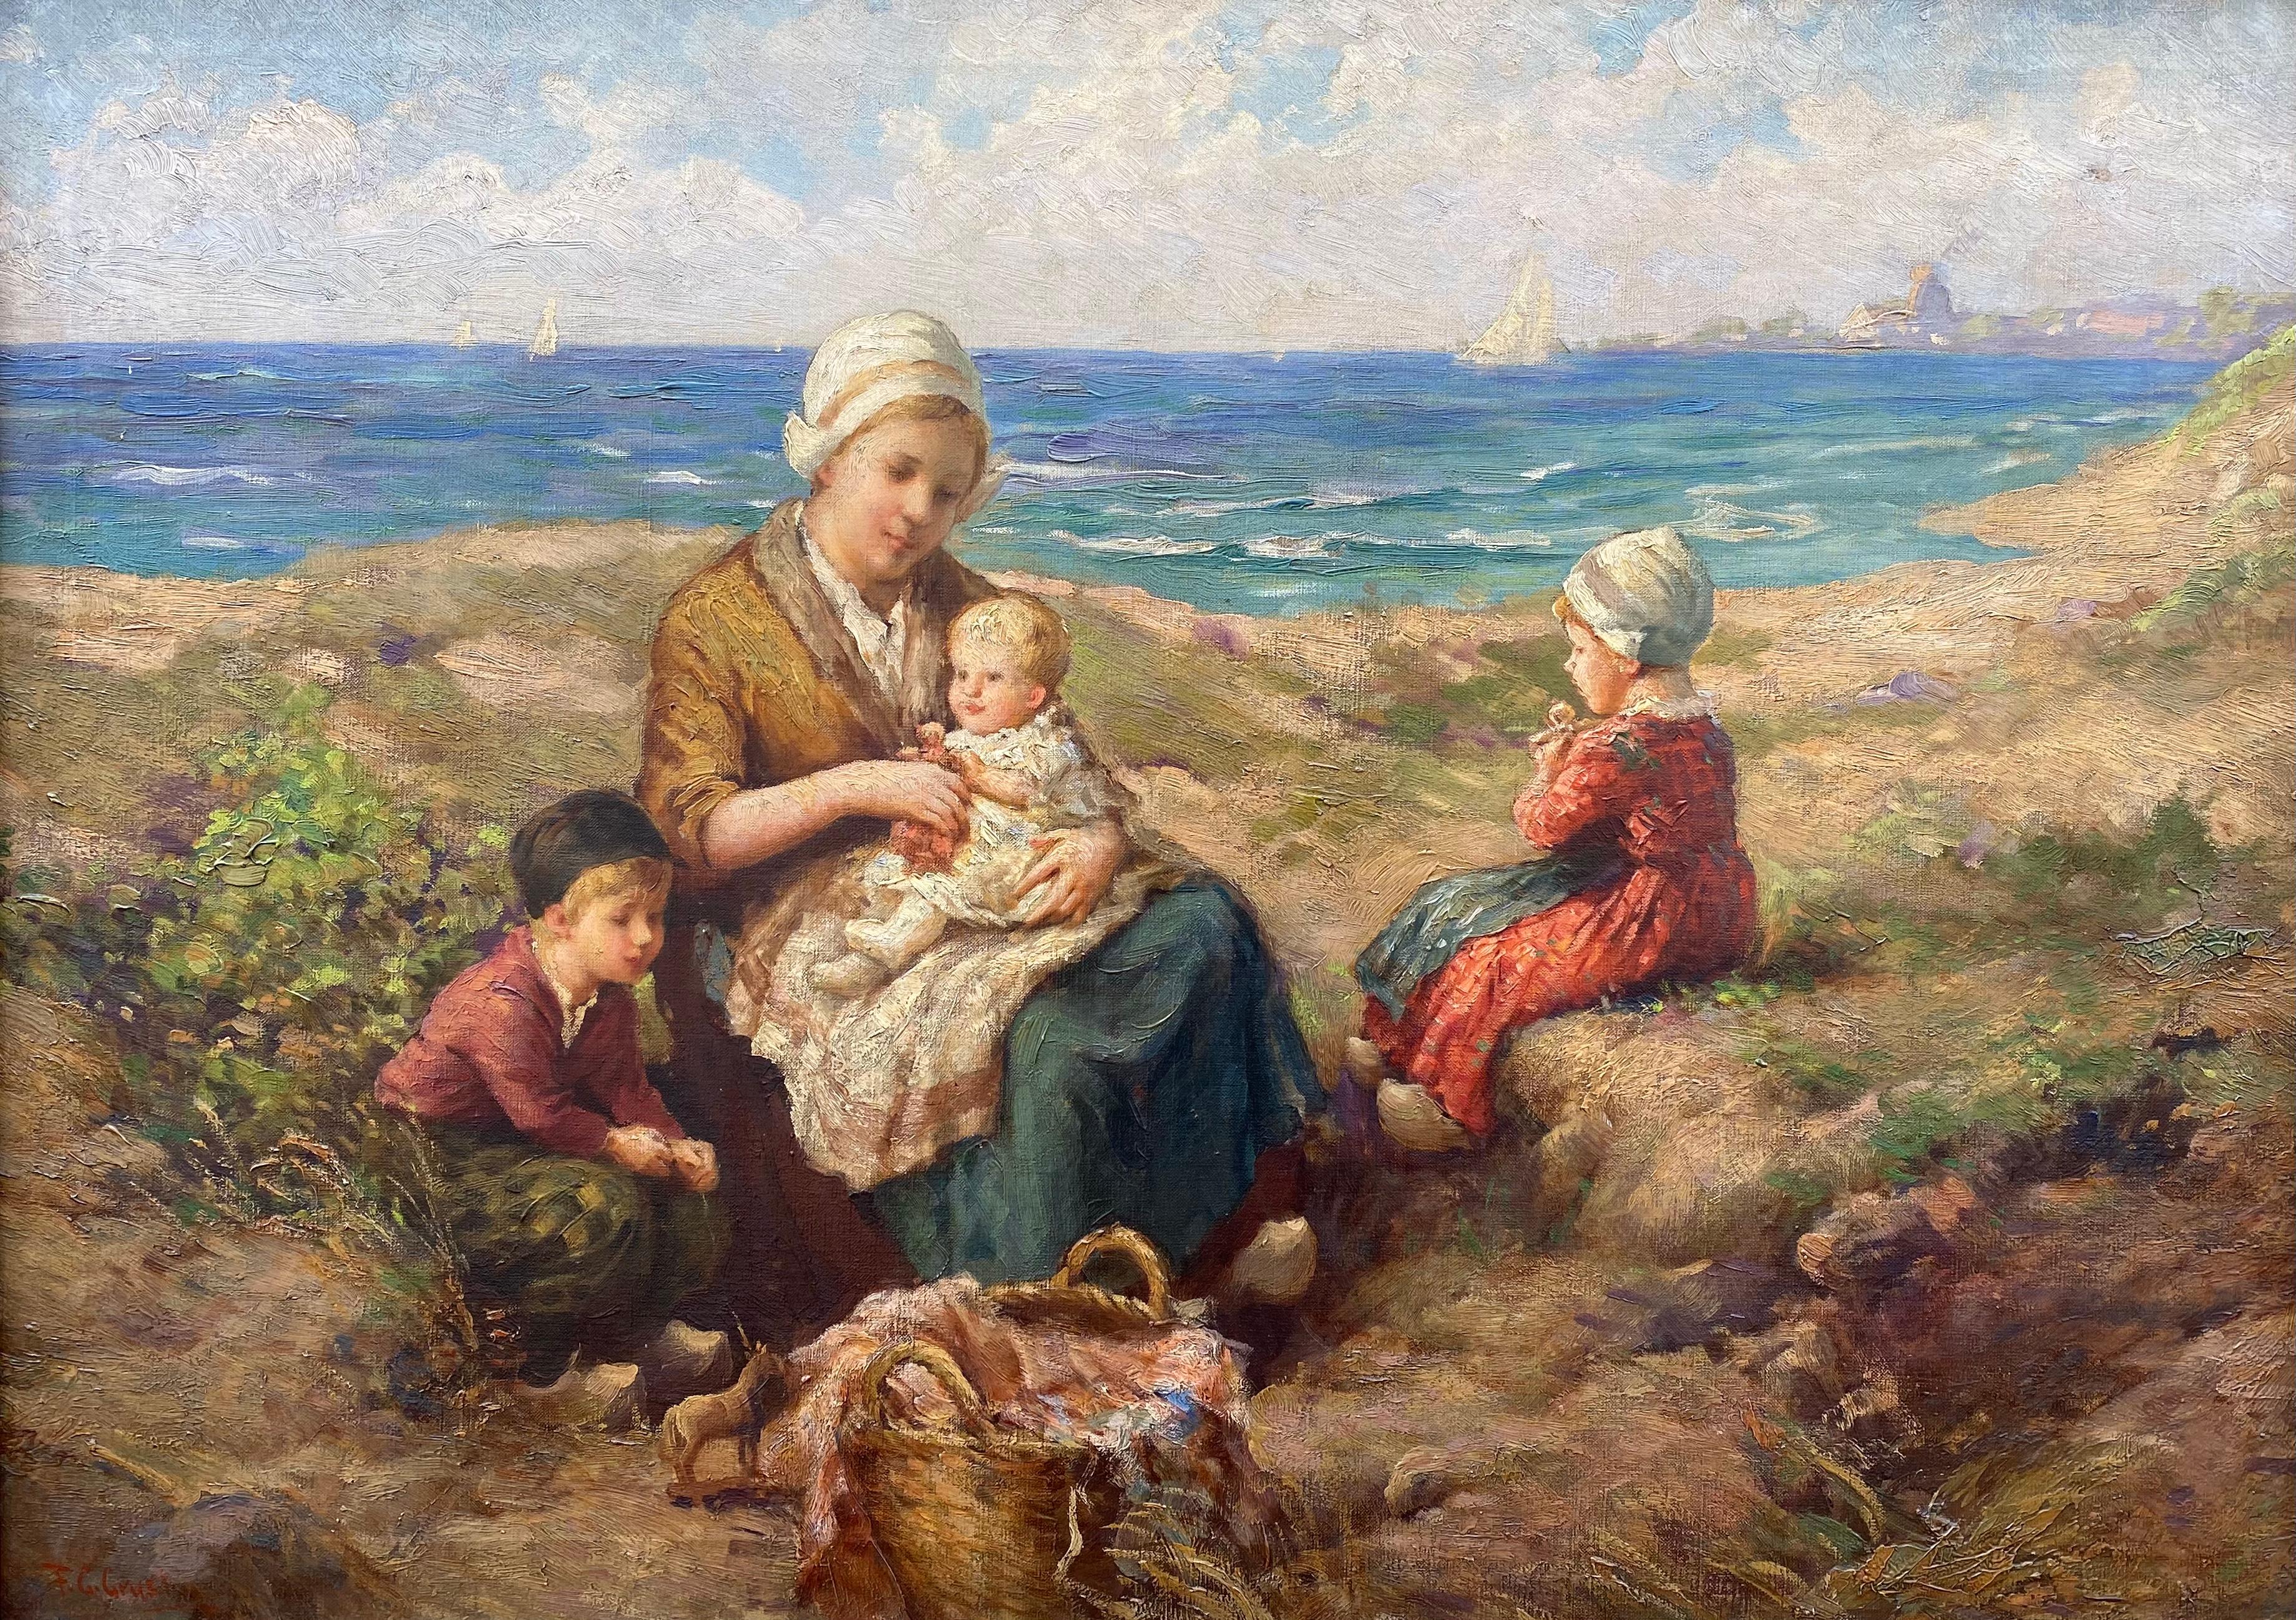 “Seaside Picnic” - Academic Painting by F. G. Grust